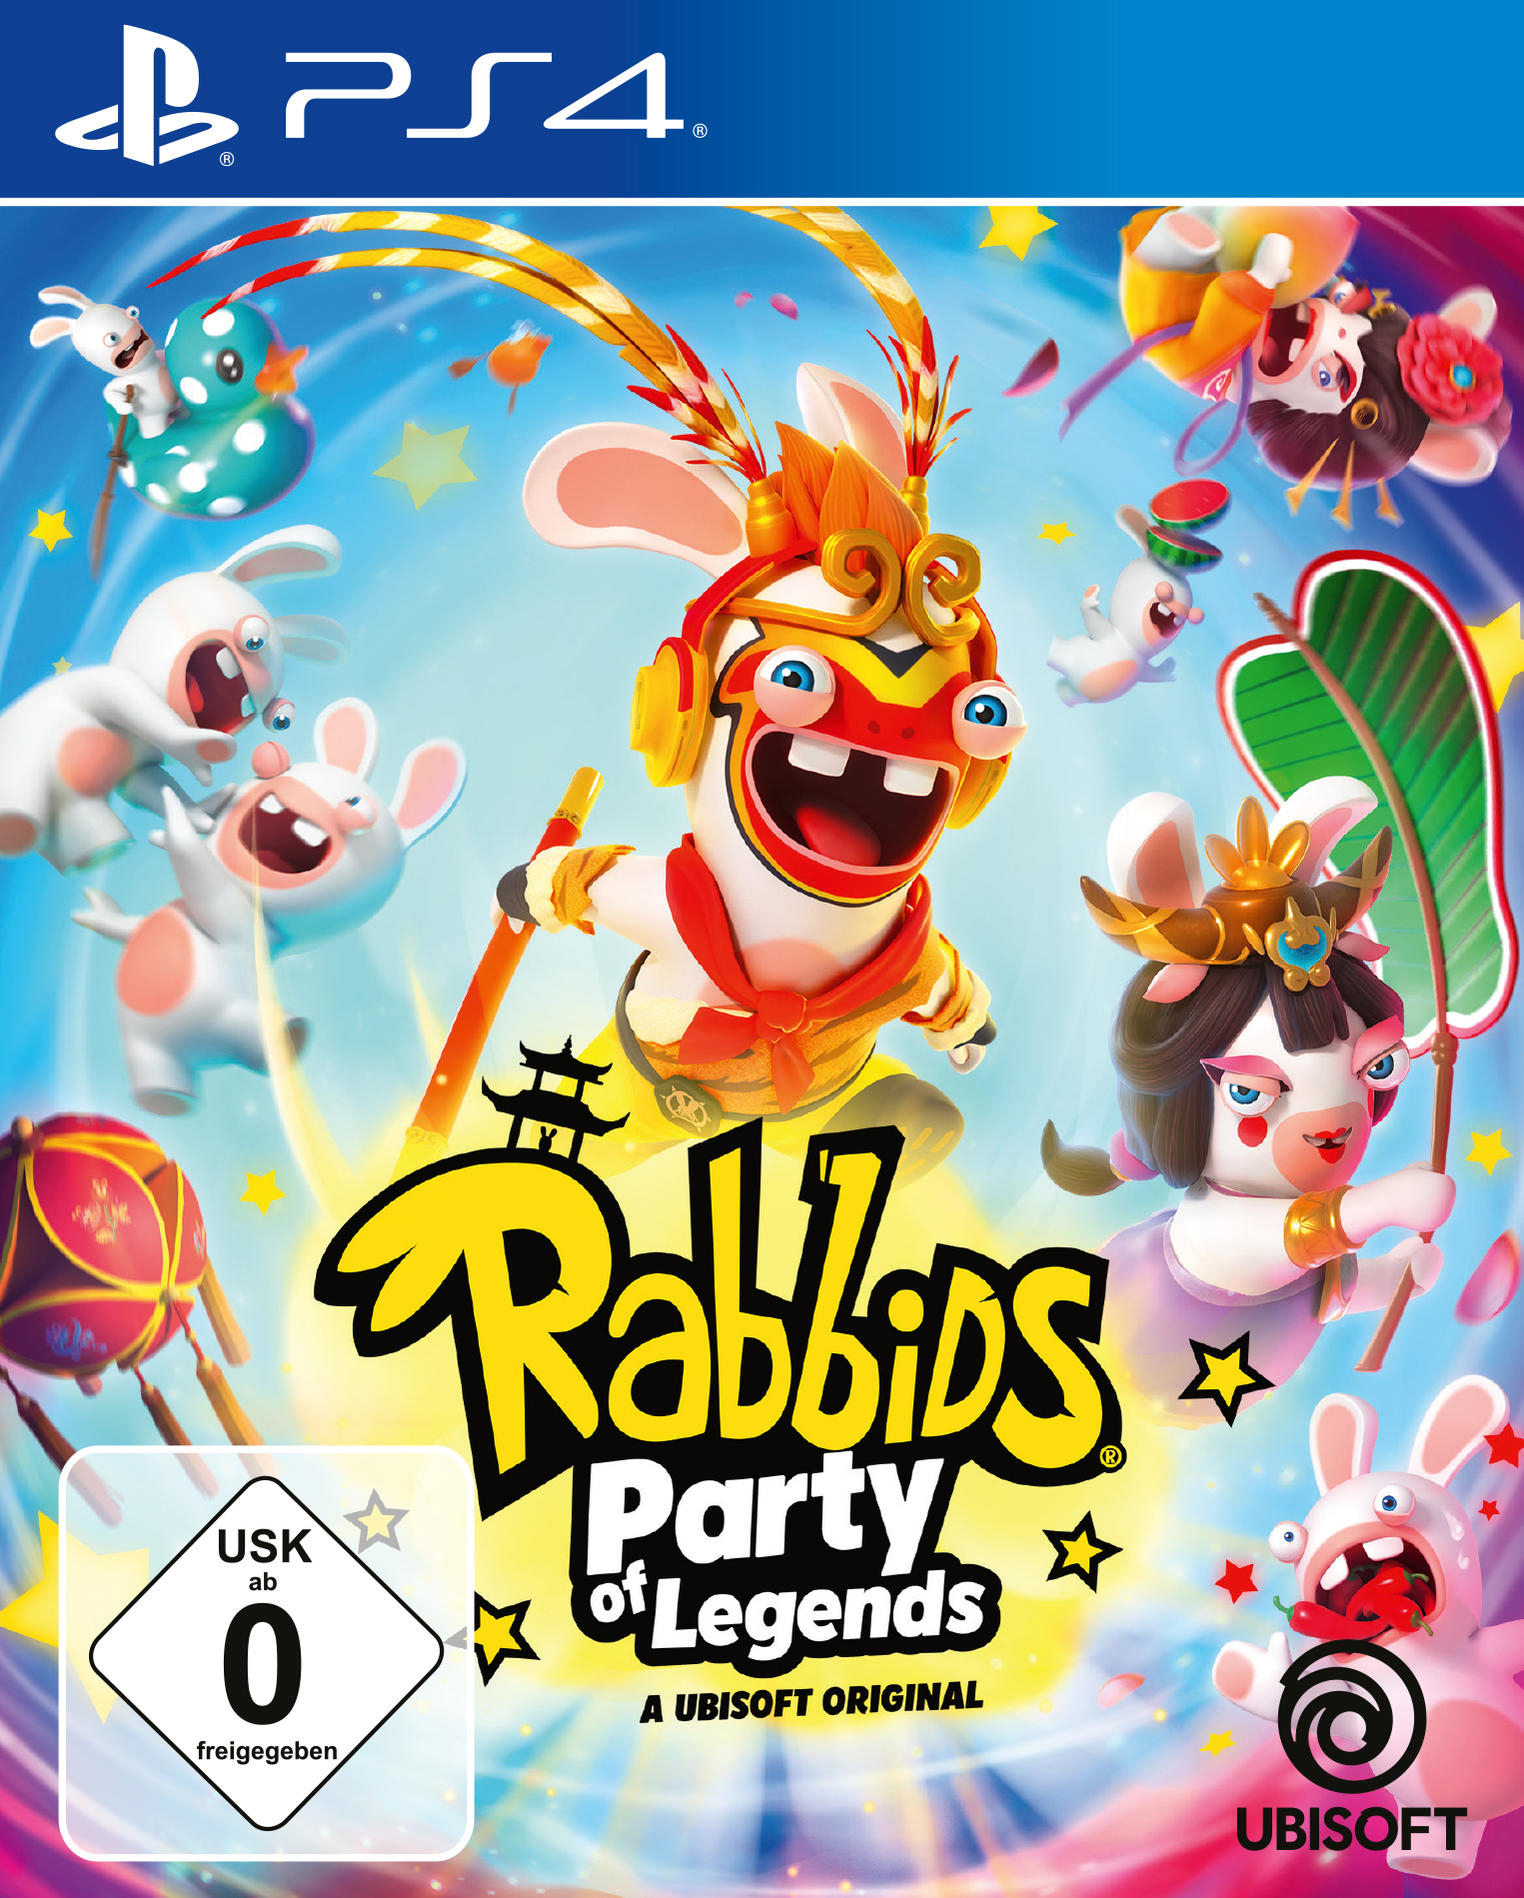 Legends Party - Rabbids: [PlayStation 4] of